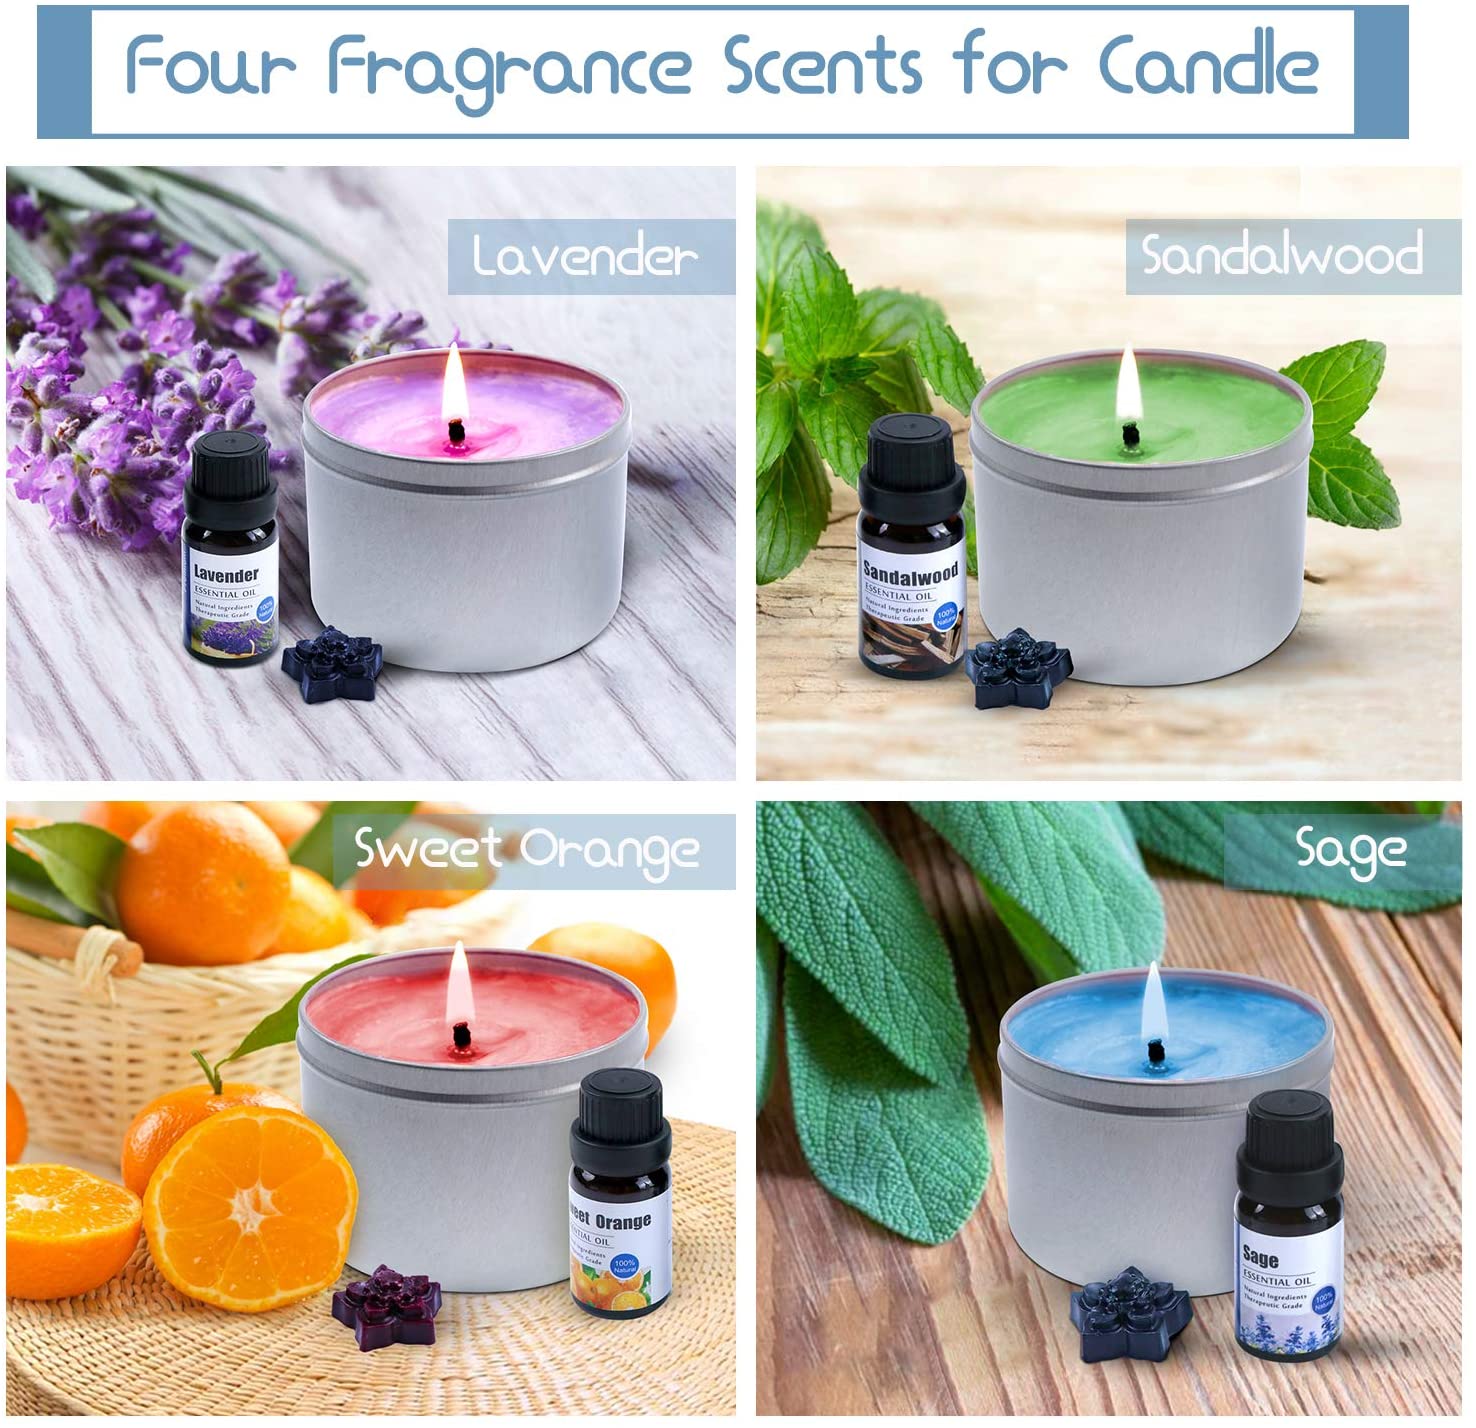 Candle Making Kit – Easy to Make Colored Candle Soy Wax Kit Include Wax,  Rich Scents, Dyes, Wicks, Tins & More